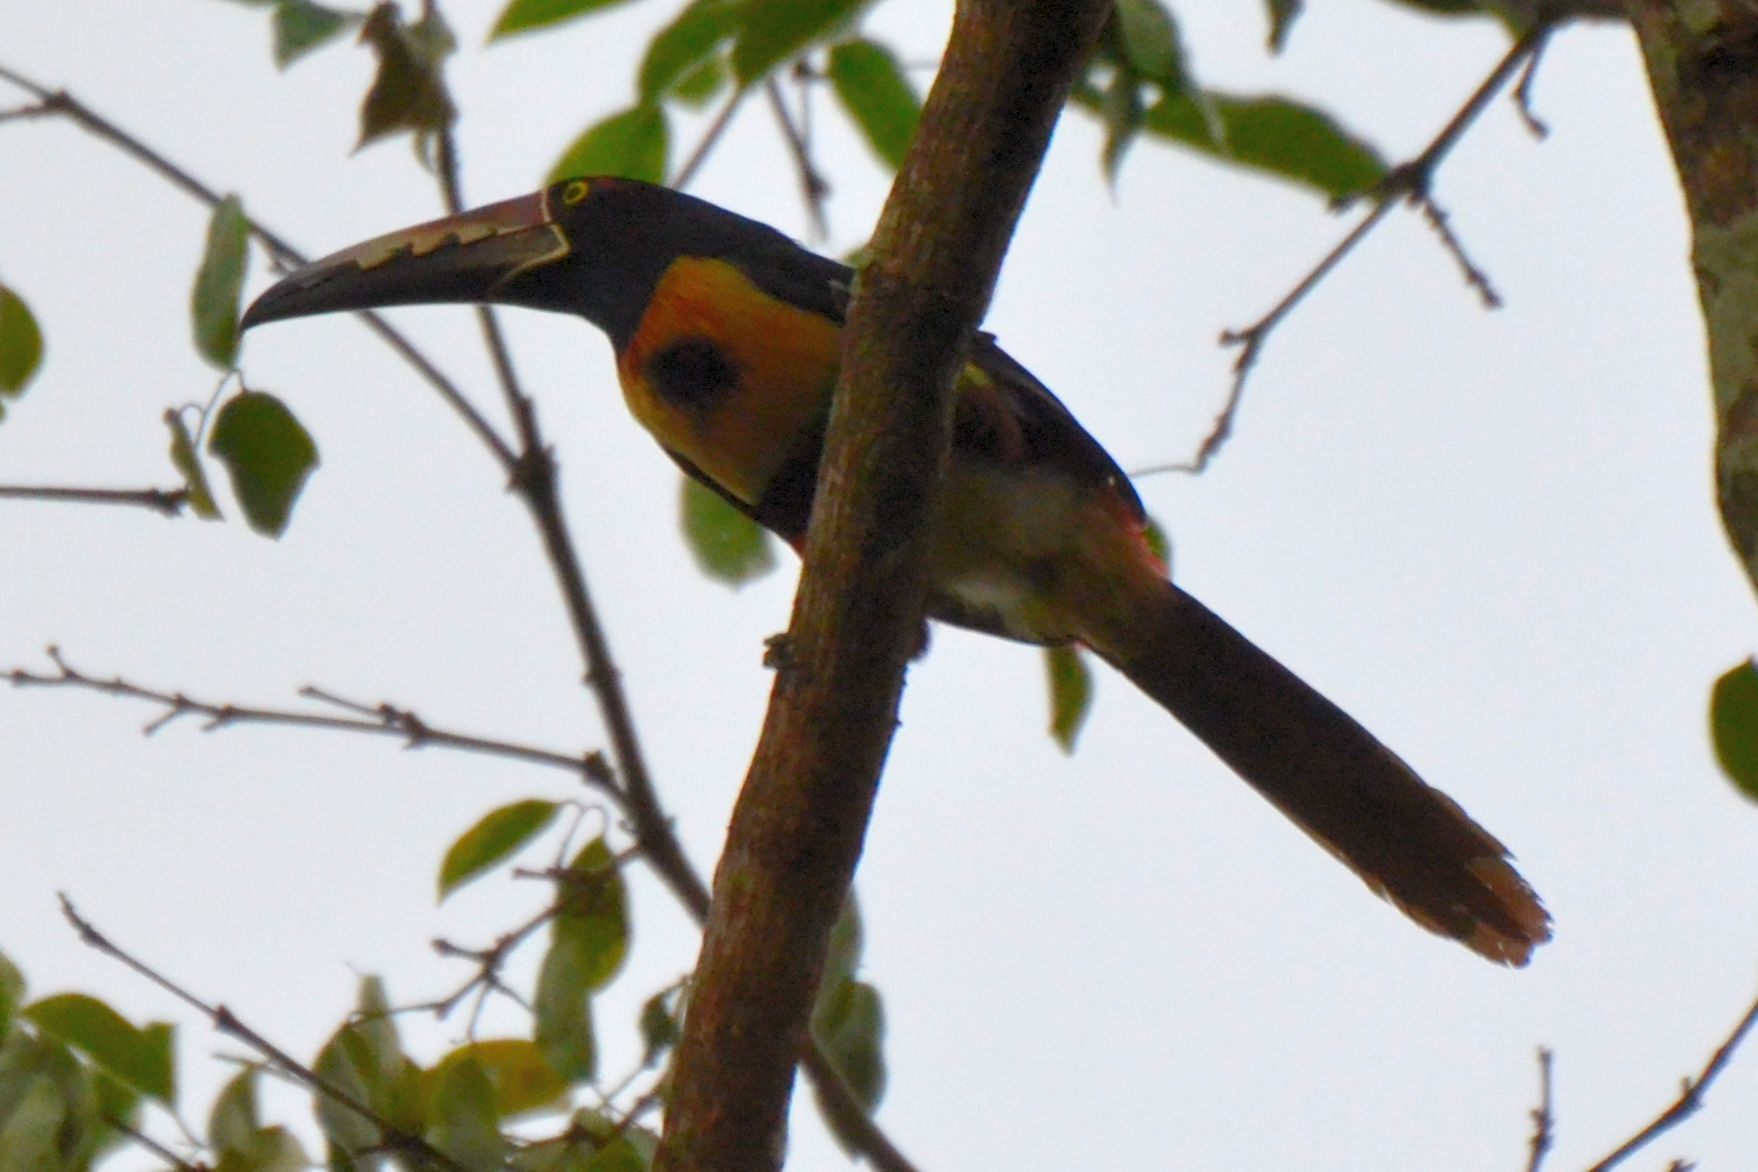 Click picture to see more Collared Aracaris.